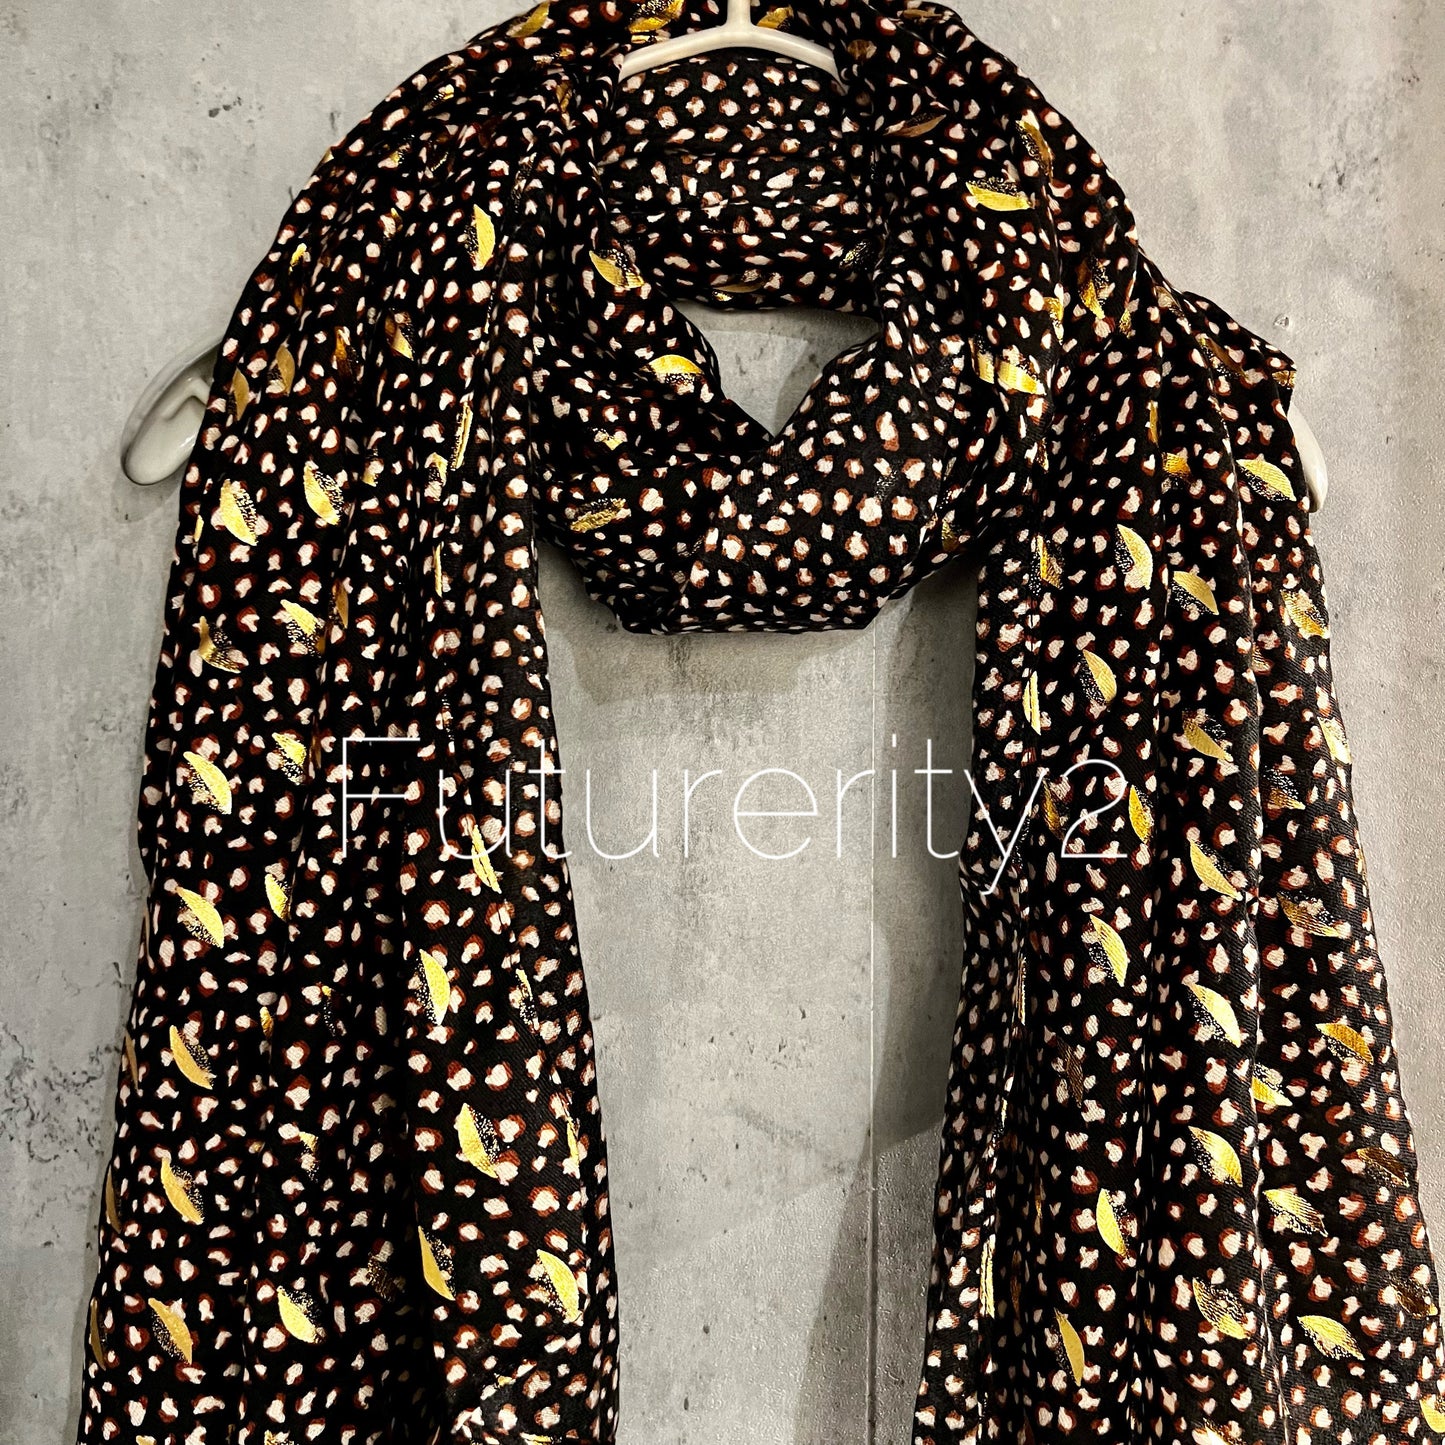 Seamless Small leaf’s With Gold Foil Black Cotton Scarf/Summer Autumn Winter Scarf/Gifts For Mum/Gifts For Her Birthday Christmas/UK Seller